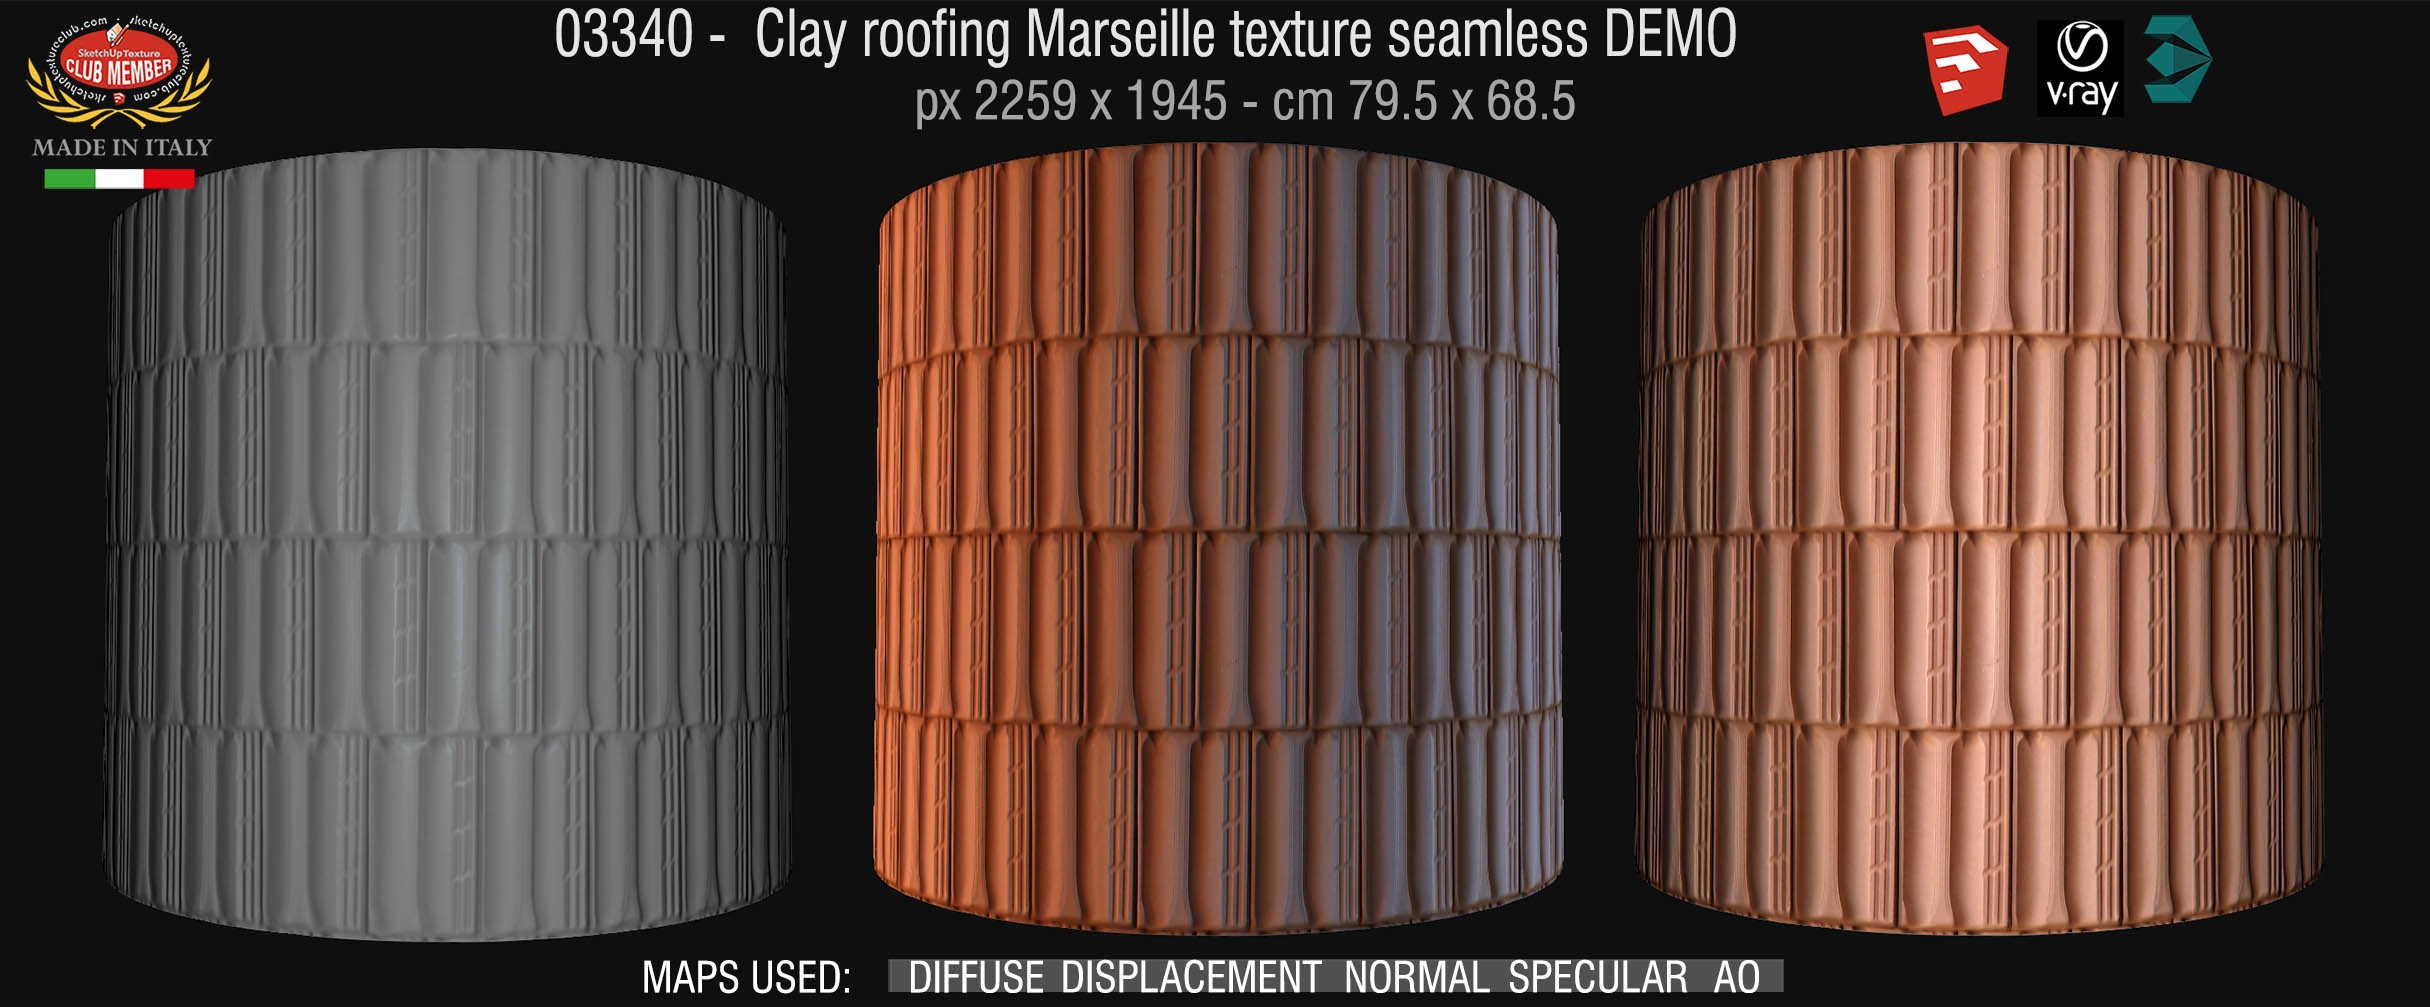 03340 Clay roofing Marseille texture seamless + maps DEMO